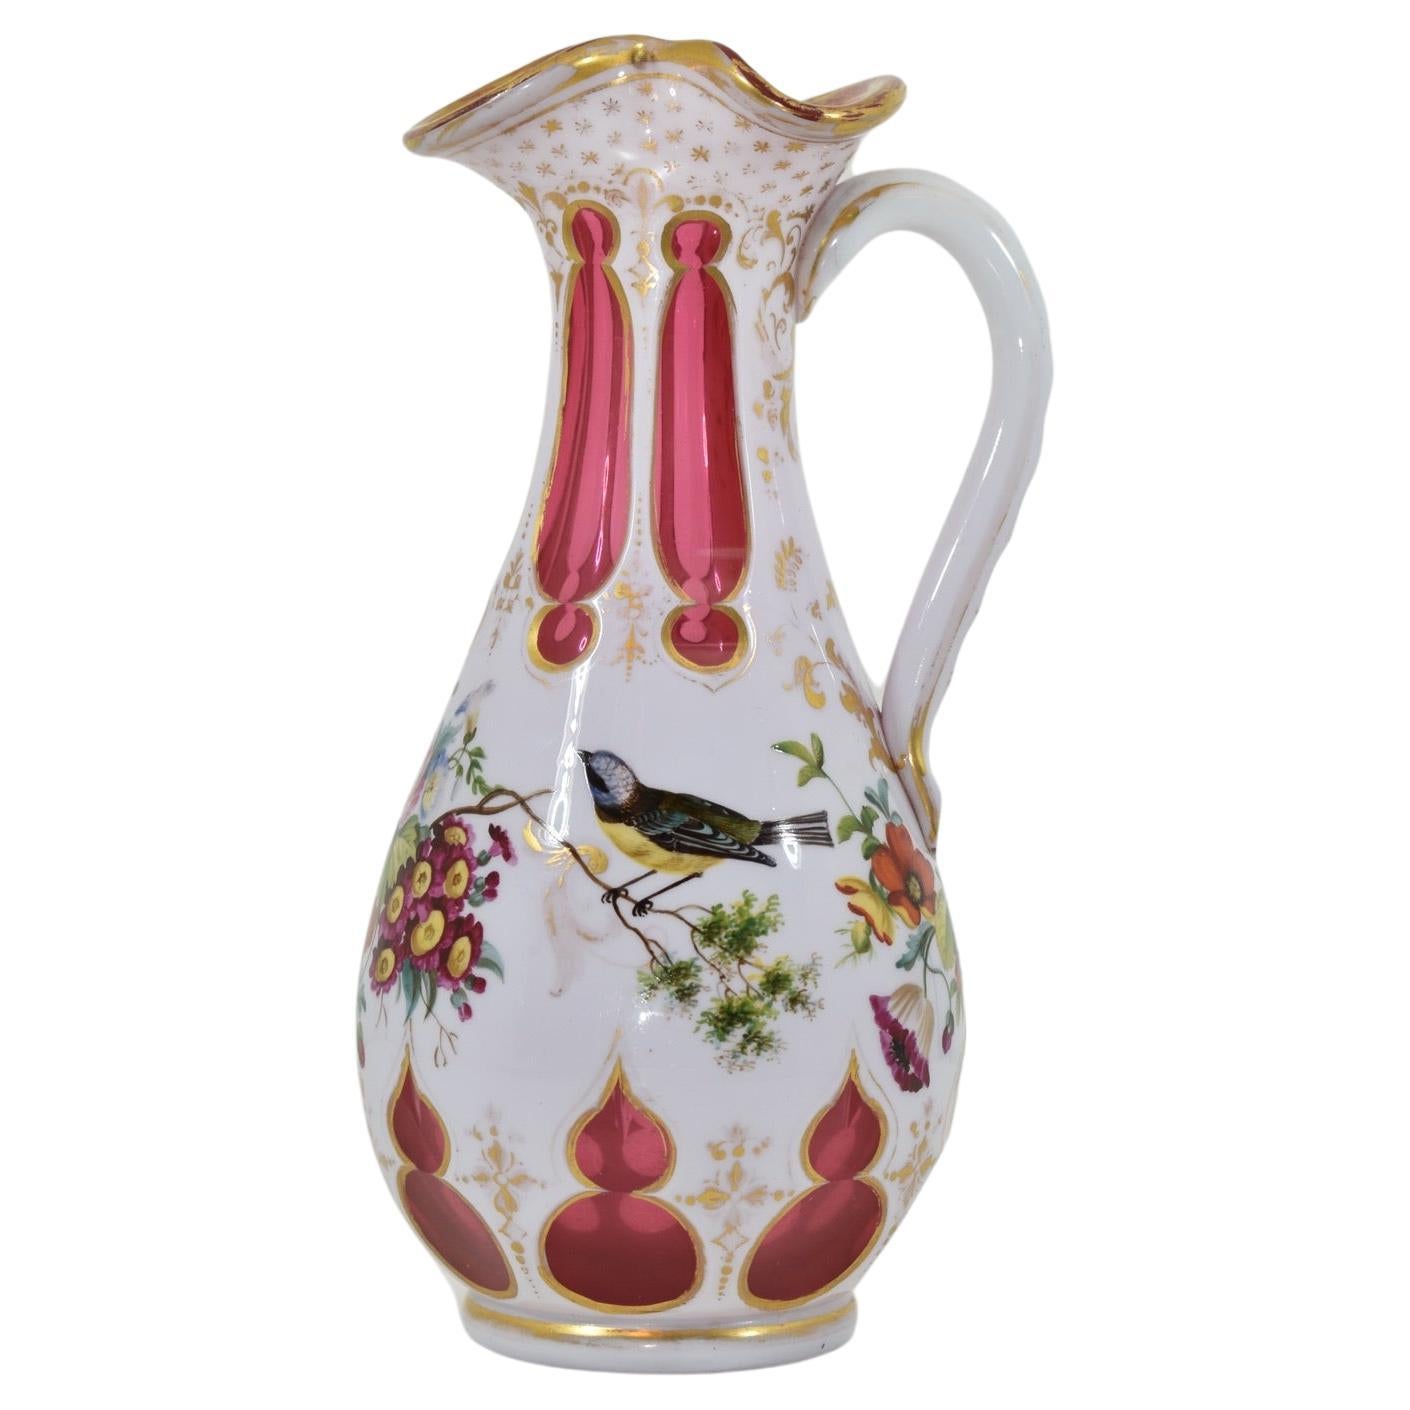 Rare overlaid glass jug.
Ruby glass with milky white opaline overlay.
Decorated with colourful enamel, featuring flowers birds snd gilding highlights. 
Bohemia, 19th century.